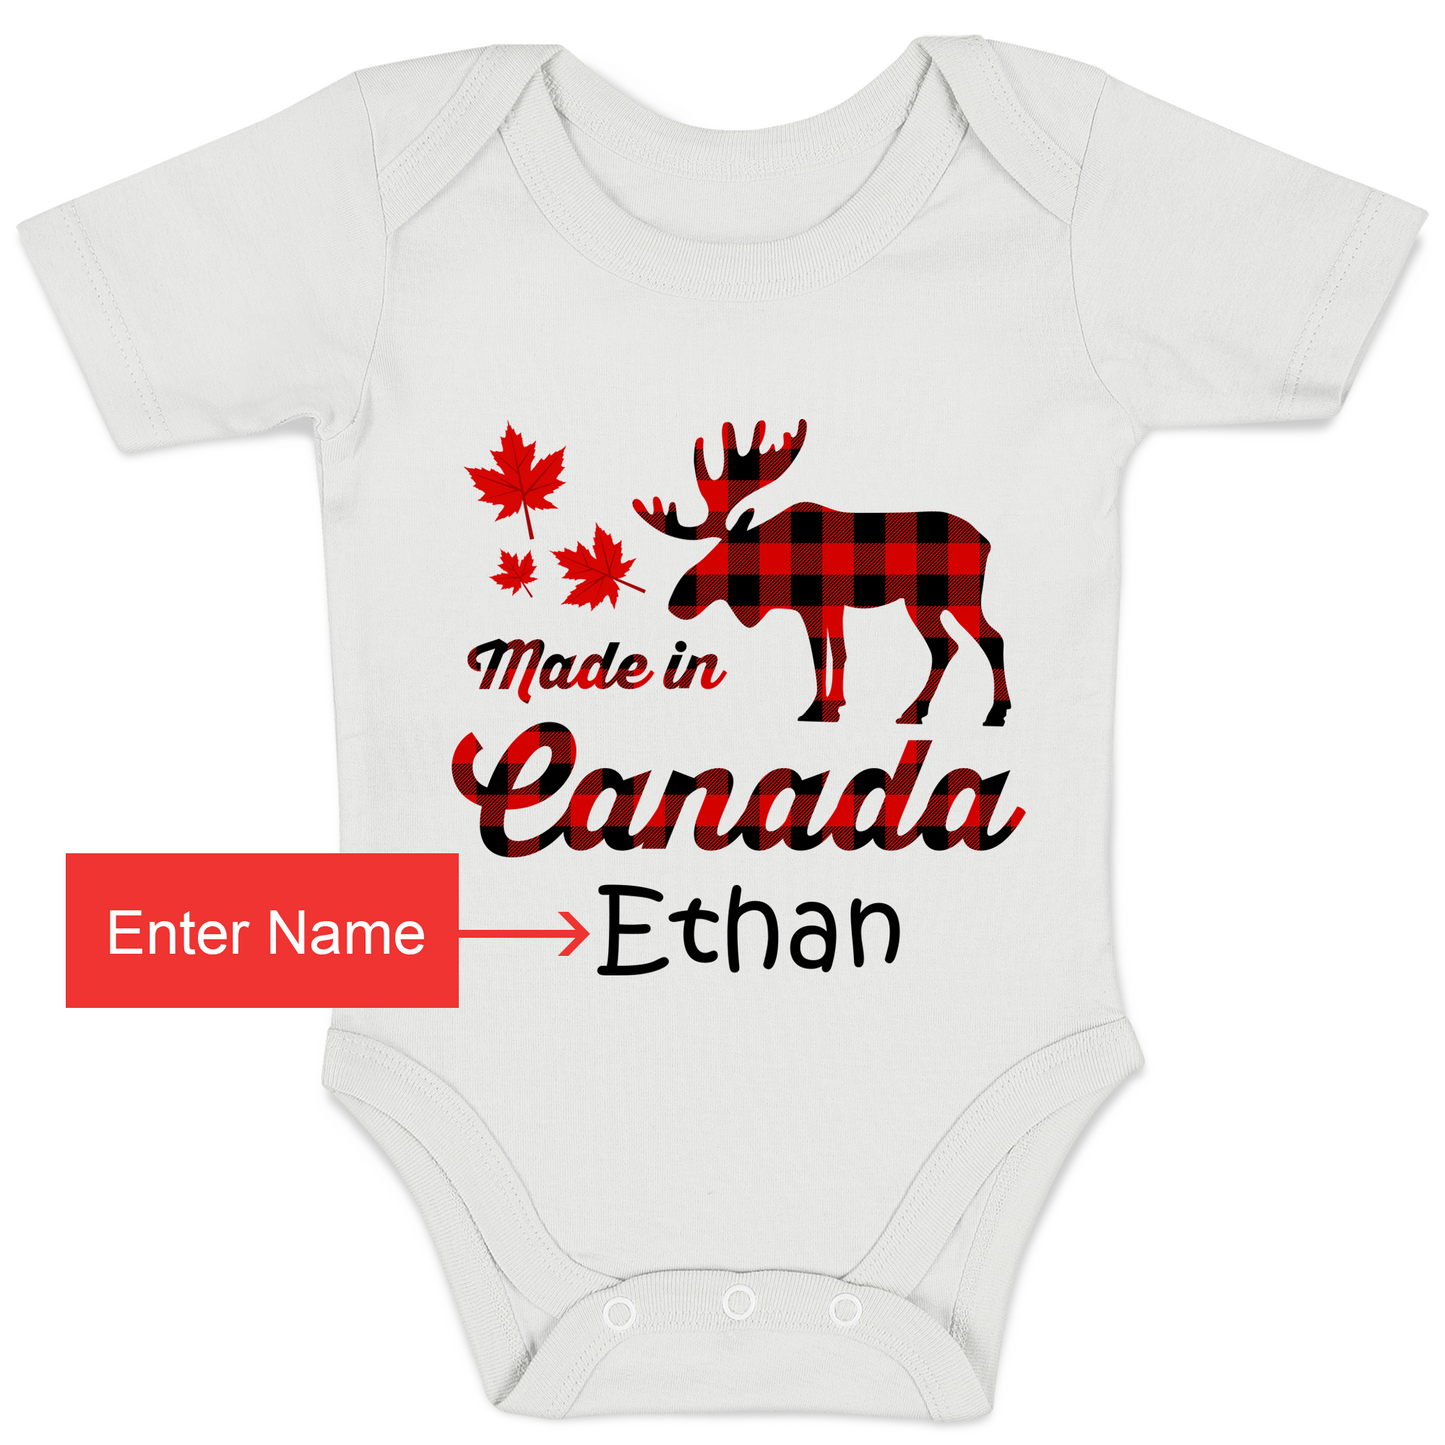 Zeronto Baby Gift Basket - Beautiful Canada, the Great White North